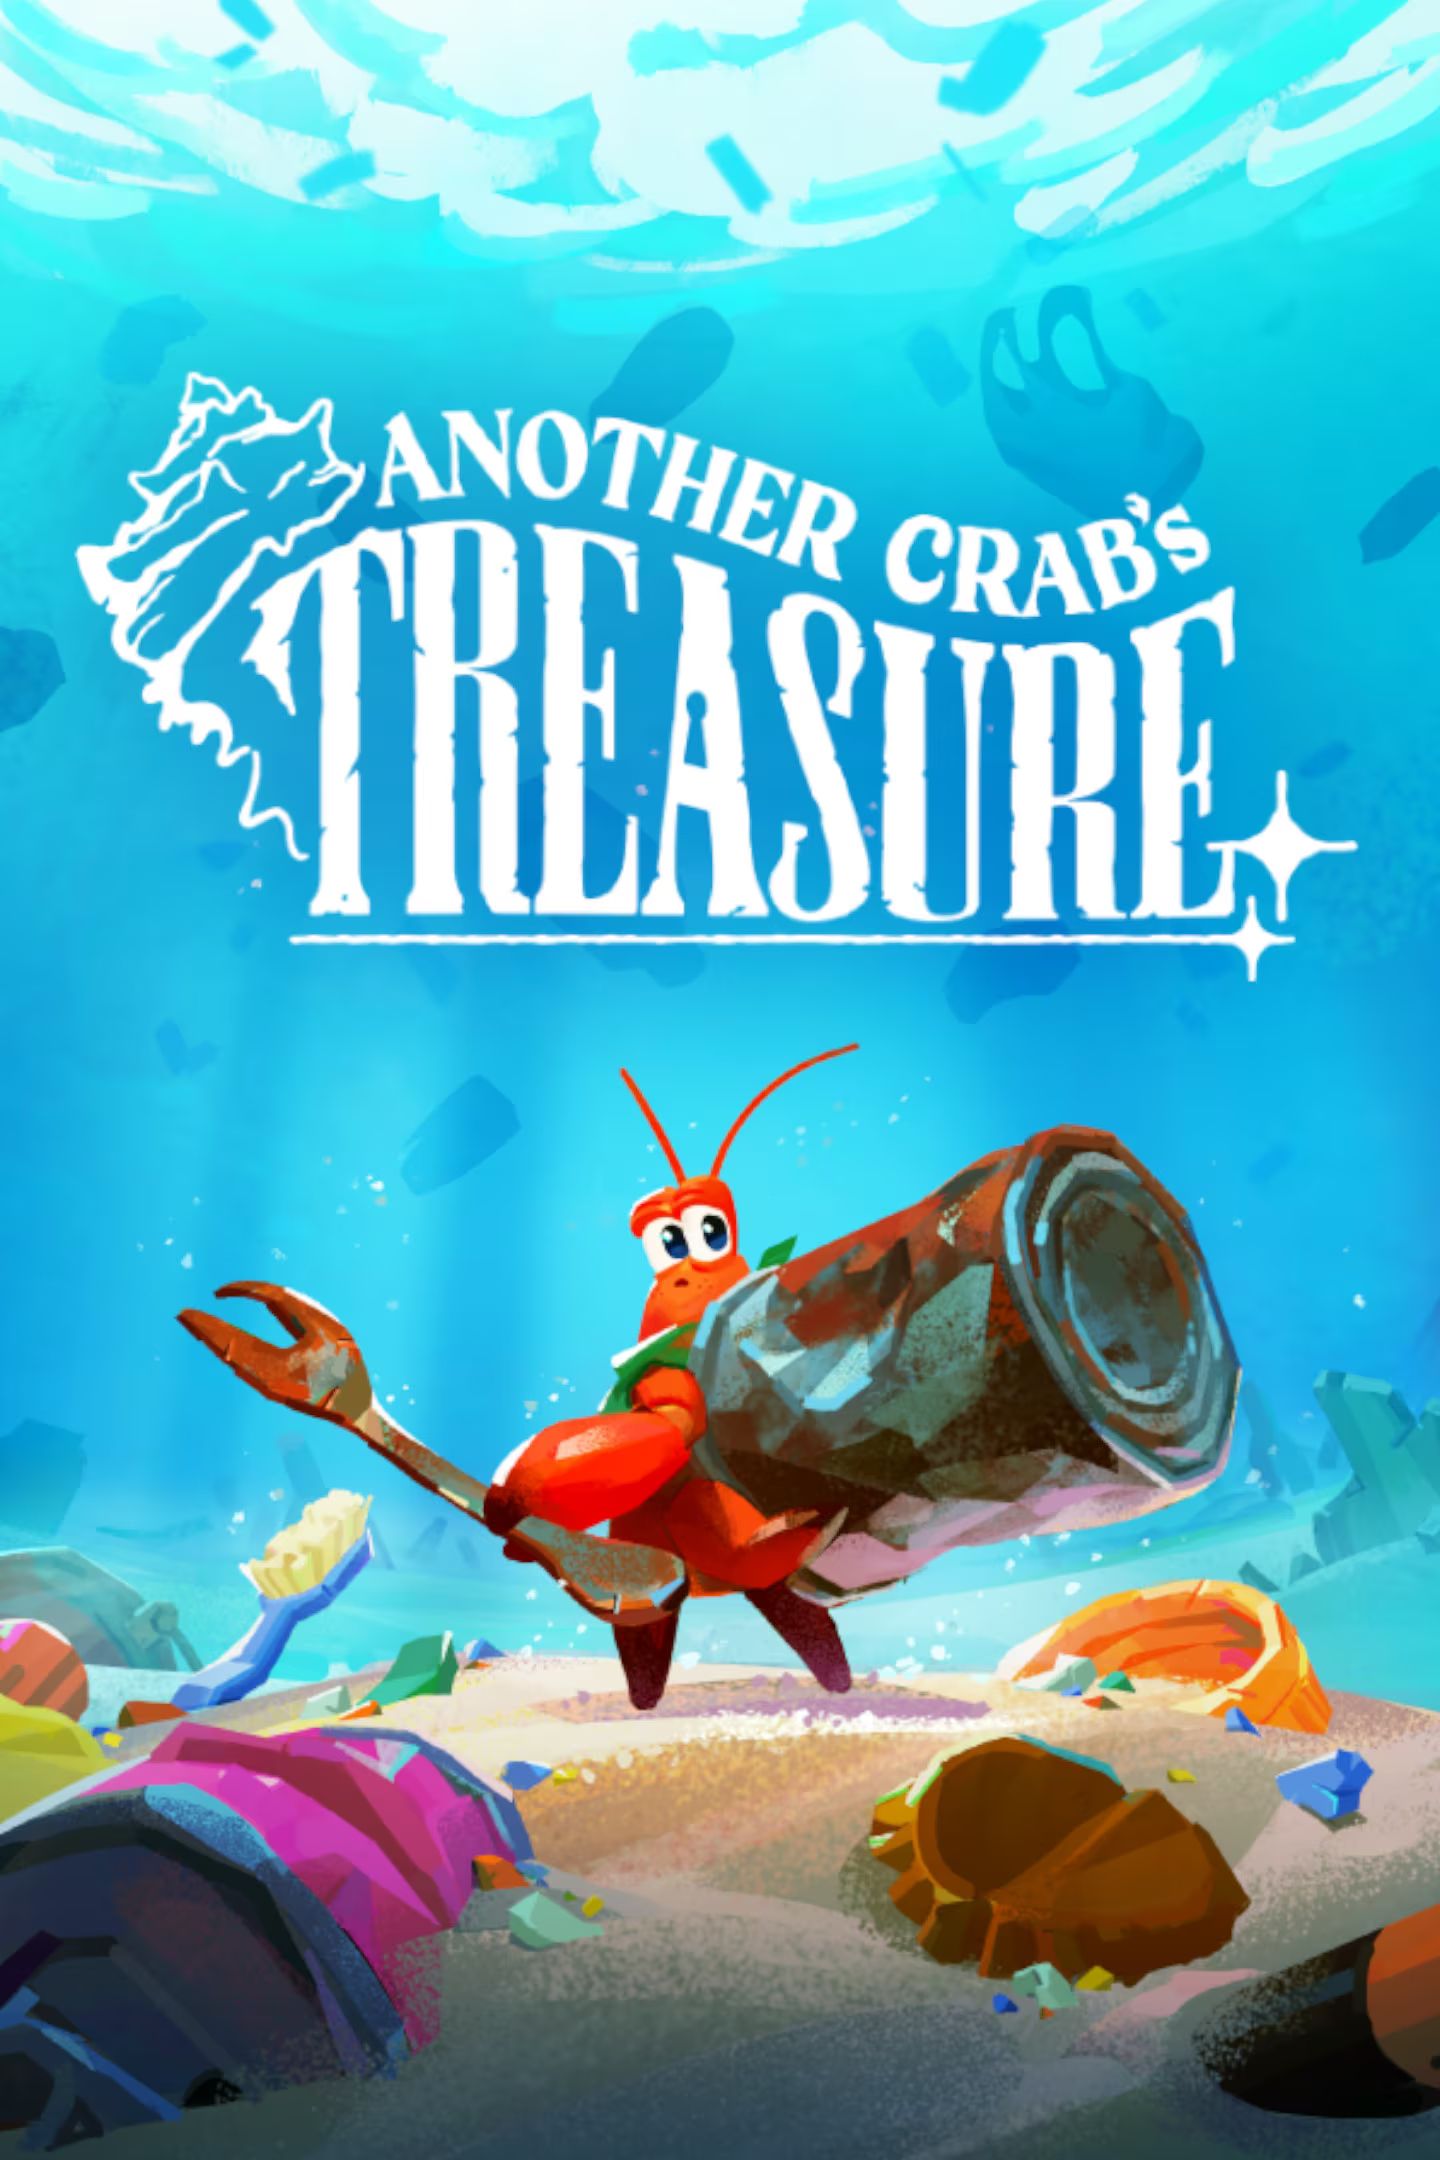 Another Crabs Treasure Game Poster